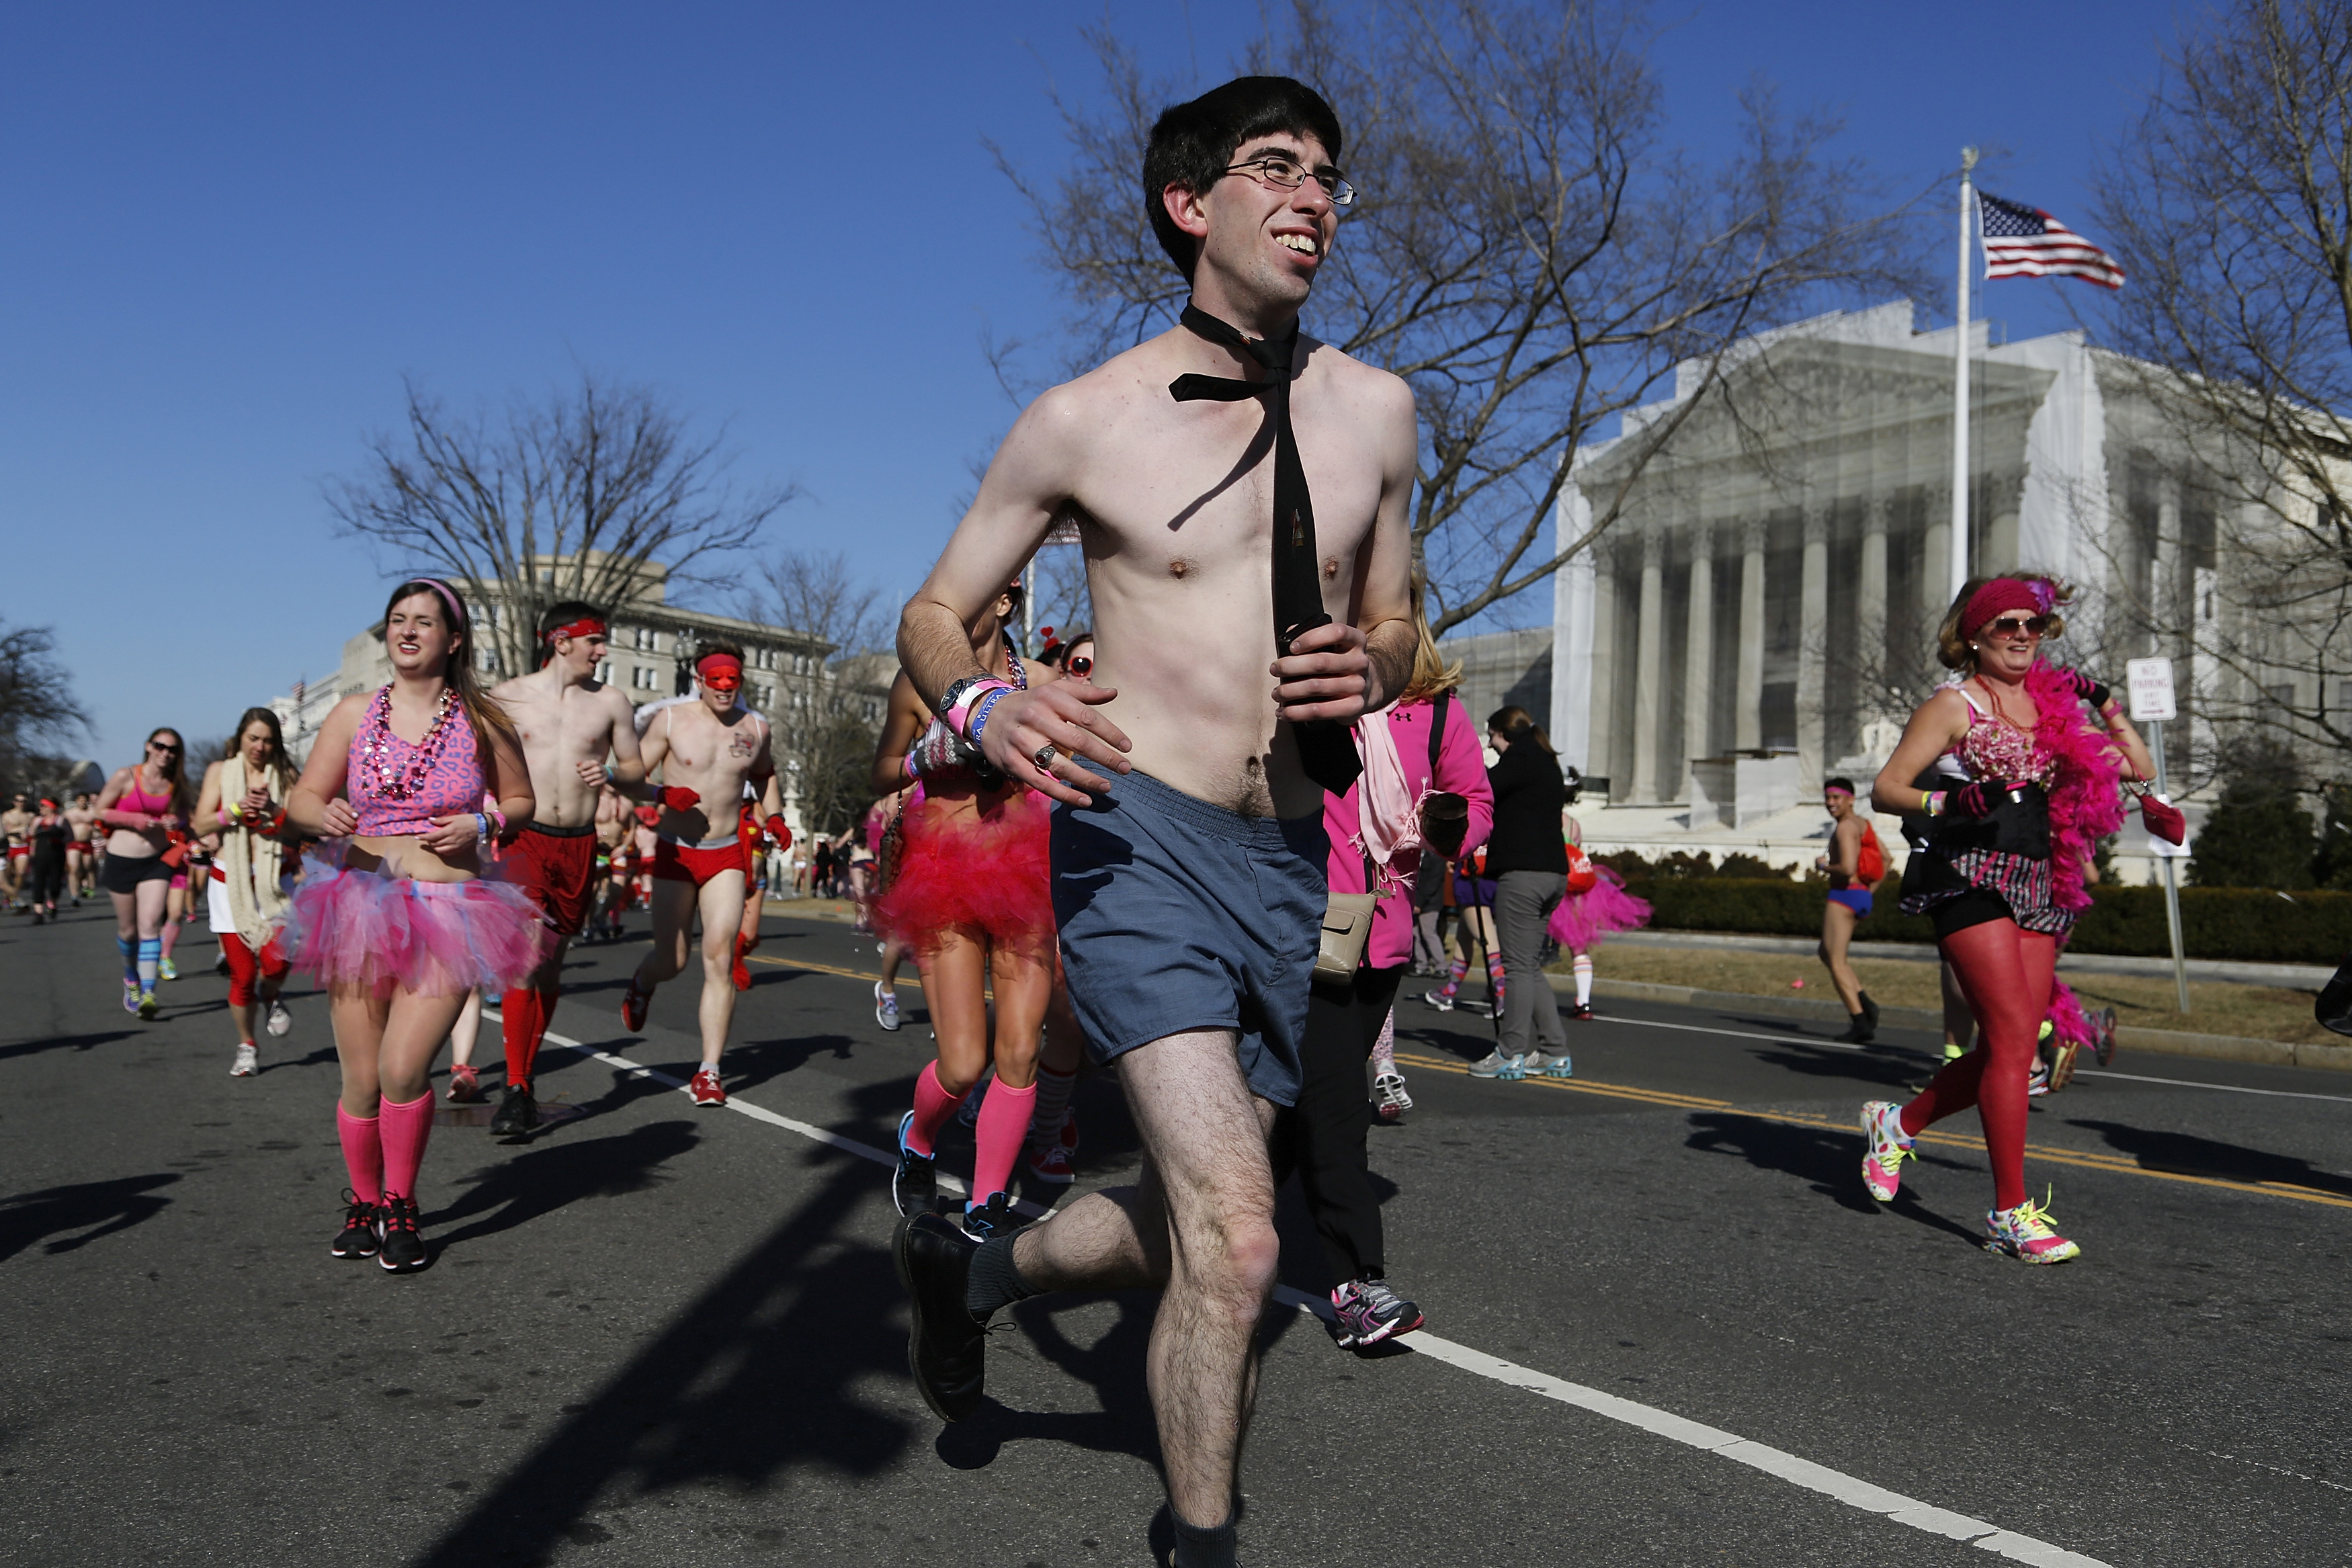 Runners pass the U.S. Supreme Court during the Cupid's Undie Run, which raises money for the Children's Tumor Foundation in Washington on February 9, 2013.